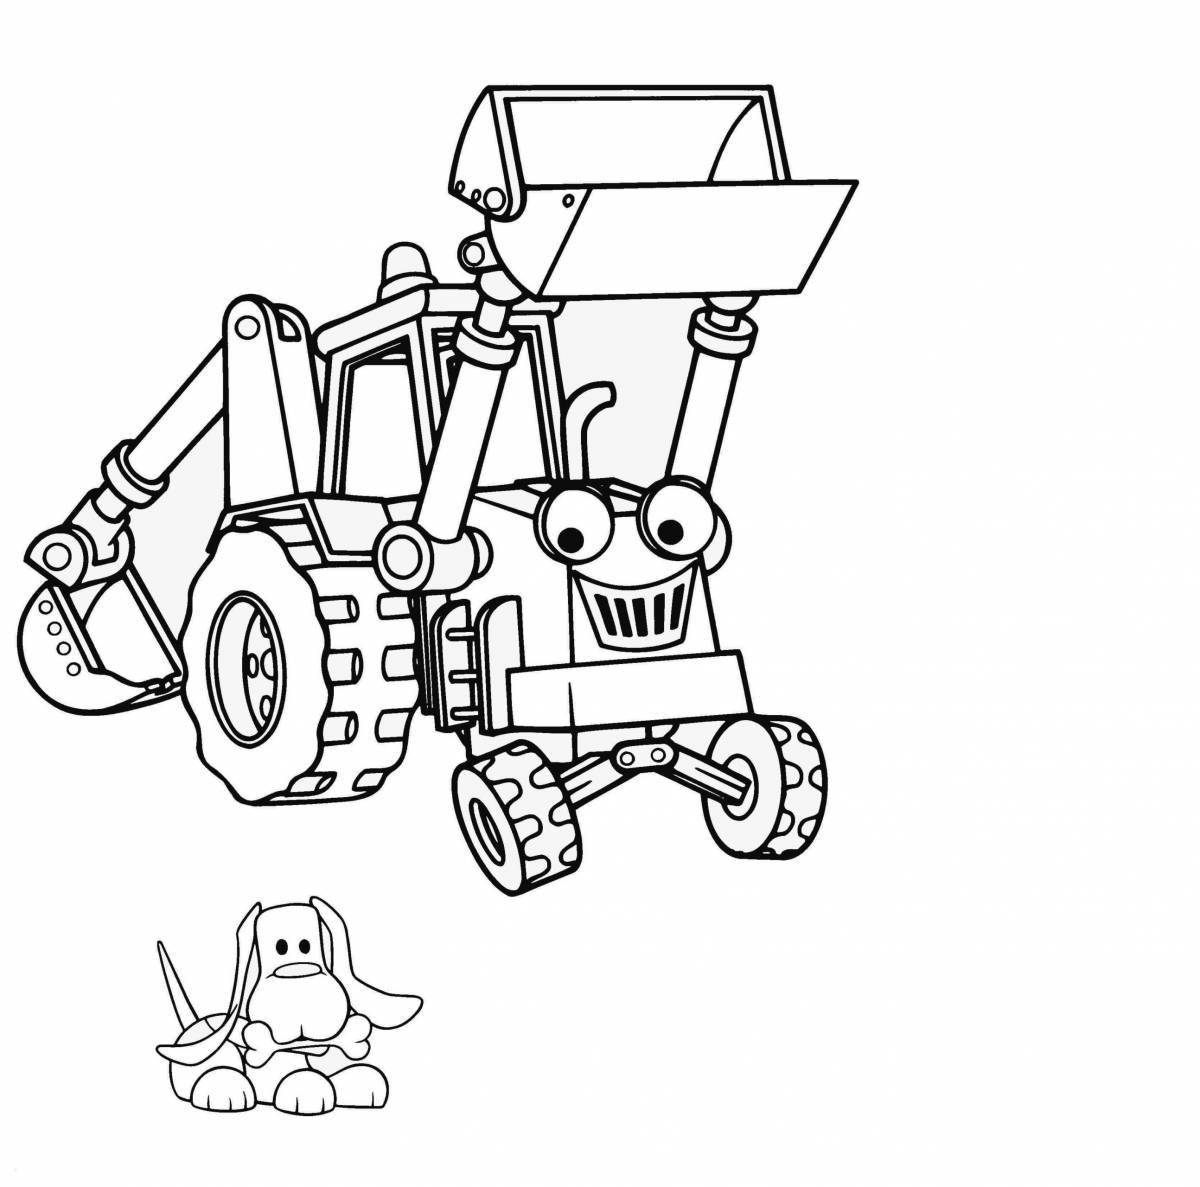 Colour-obsessed excavator coloring book for kids